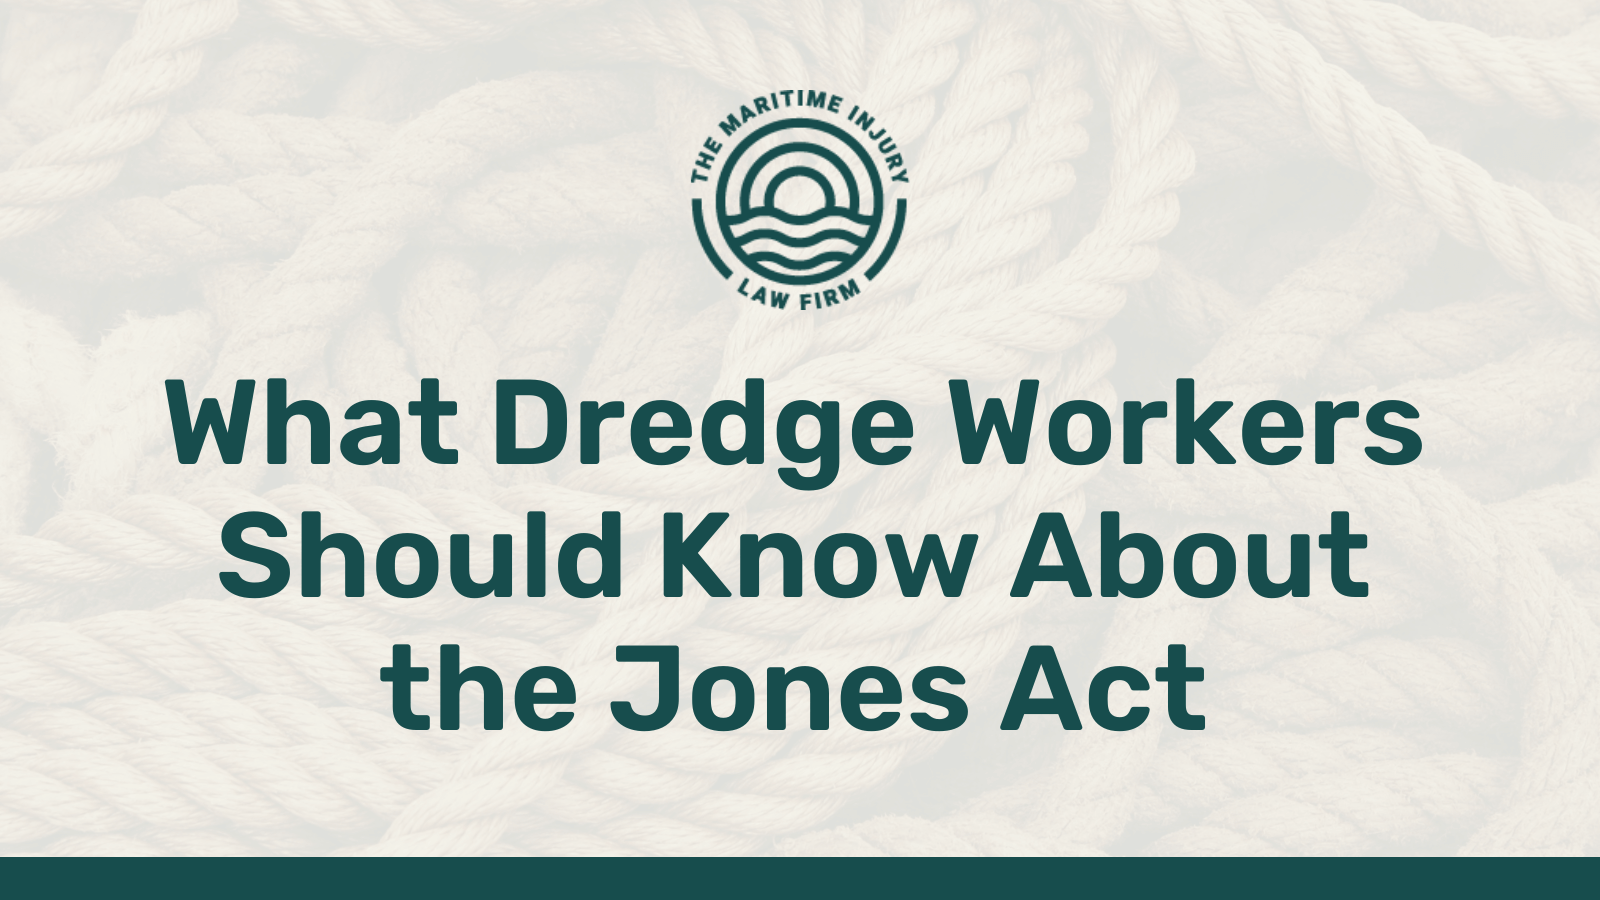 What Dredge Workers Should Know About the Jones Act - maritime injury law firm - George Vourvoulias